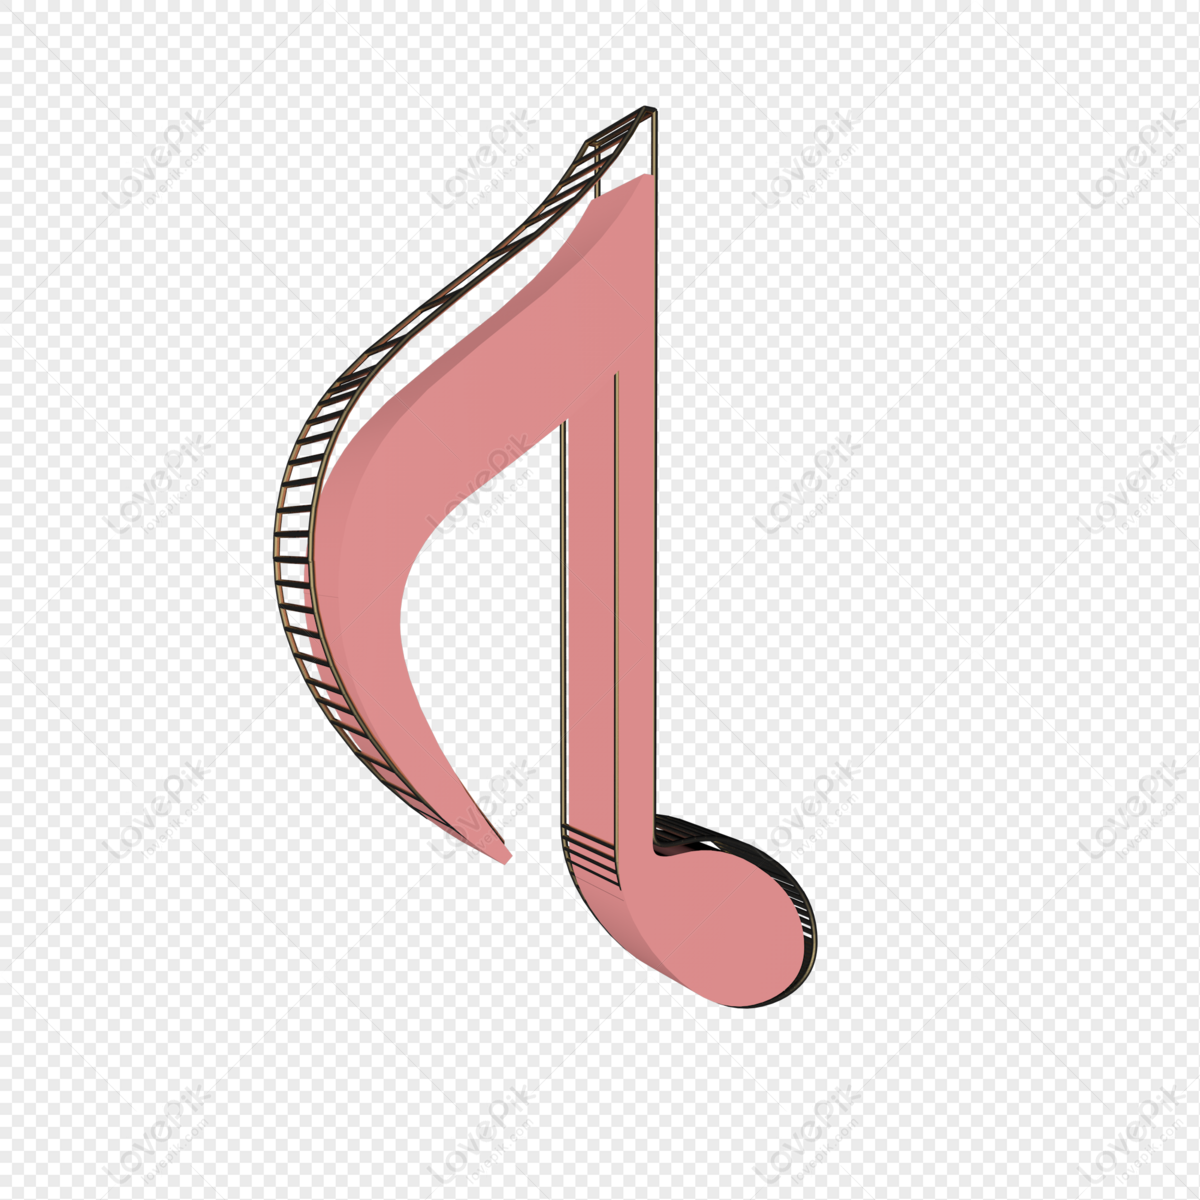 Music Symbol PNG Hd Transparent Image And Clipart Image For Free Download -  Lovepik | 401336024